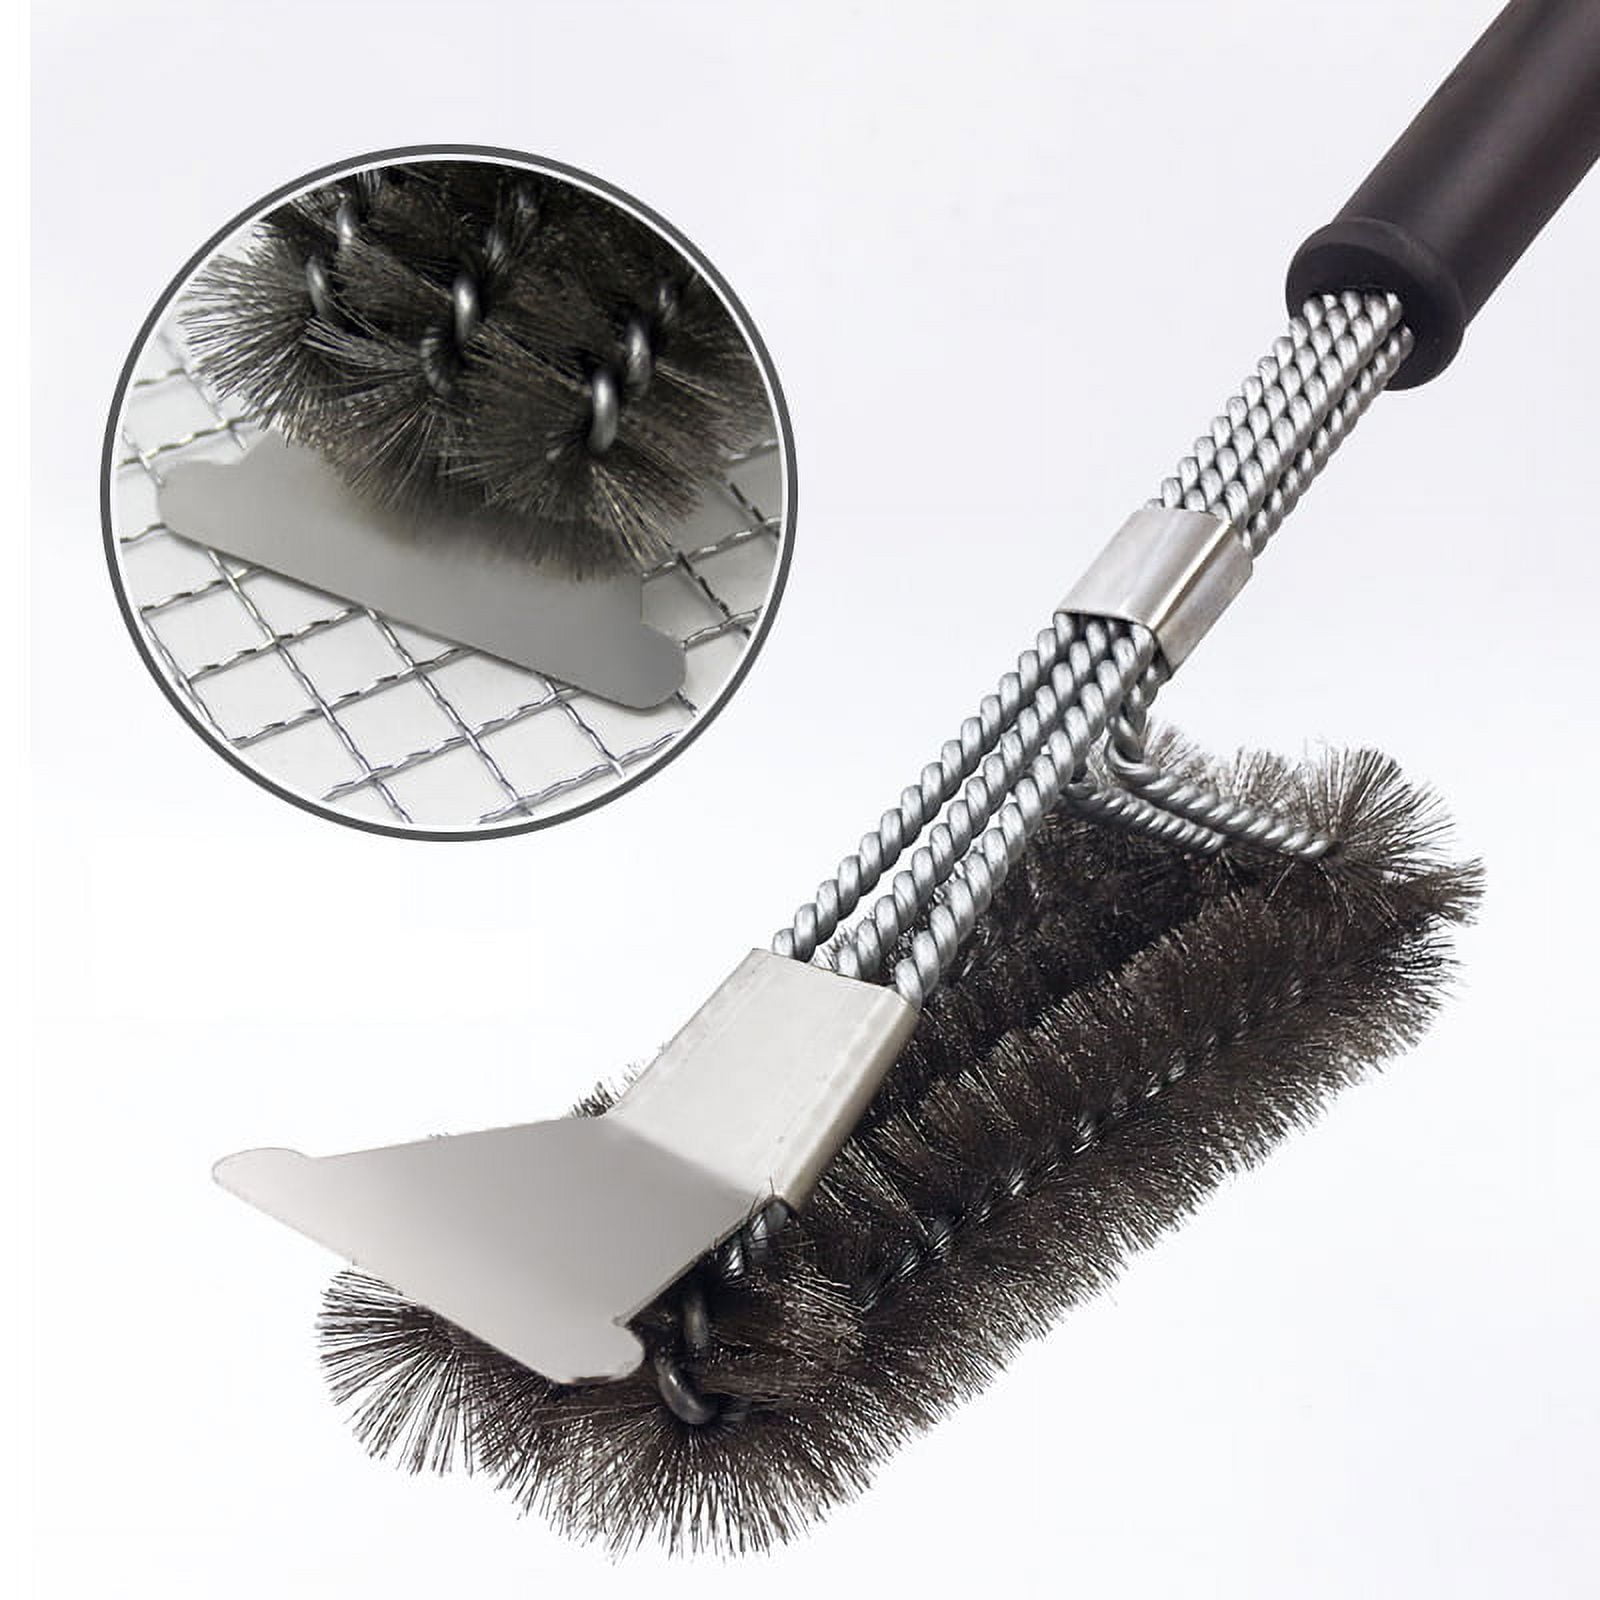 Tebru Grill Brush Extra Strong Kitchen BBQ Cleaner Stainless Steel Safe Wire Bristles, BBQ Grill Cleaning Brush, Grill Brush